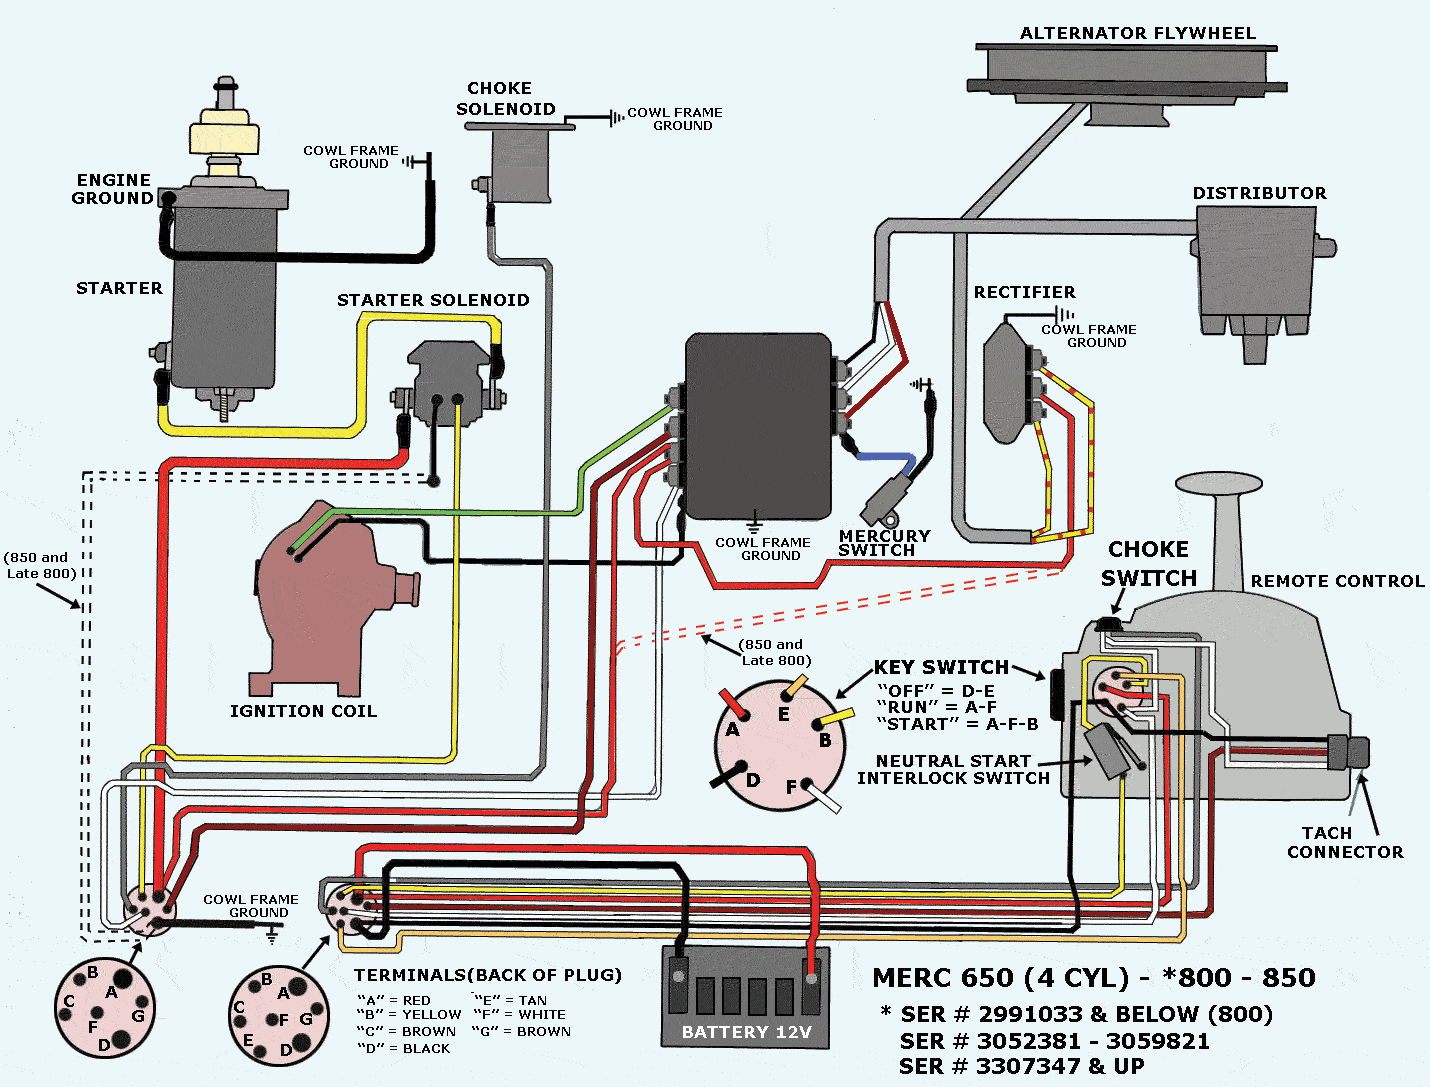 Wiring Schematic 75 85 hp mercury Page: 1 - iboats Boating Forums | 599788